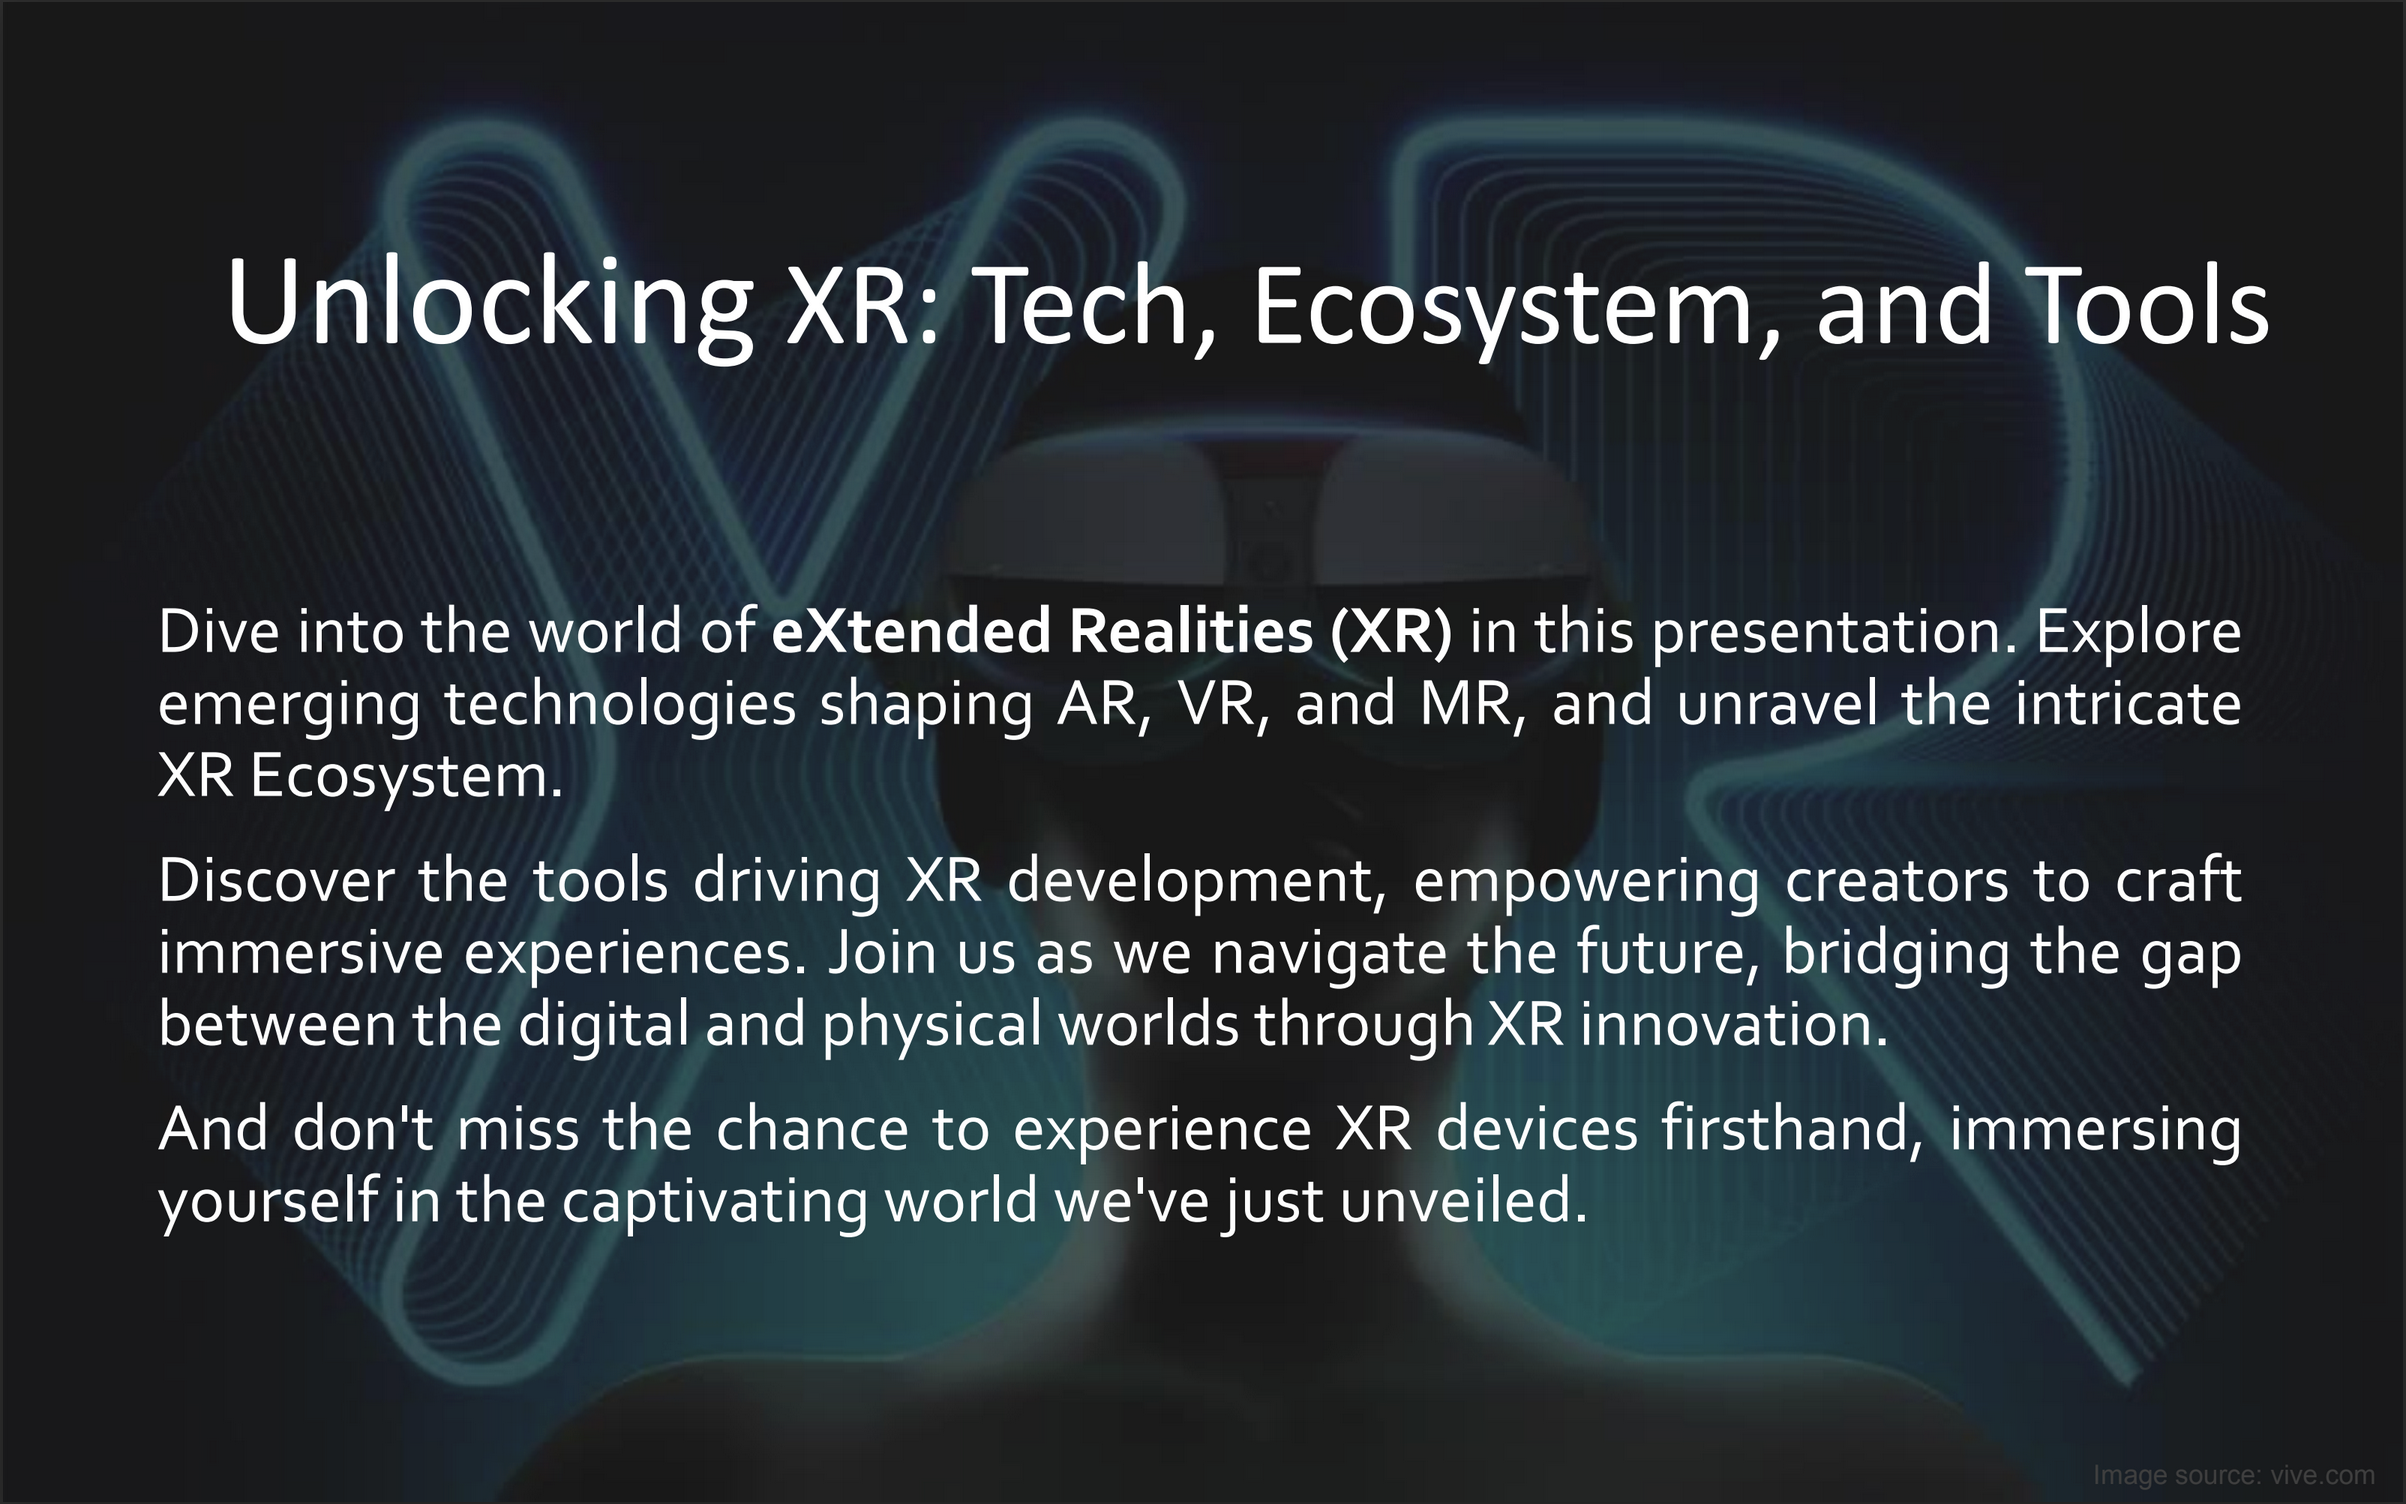 Unlocking XR: Tech, Ecosystem, and Tools